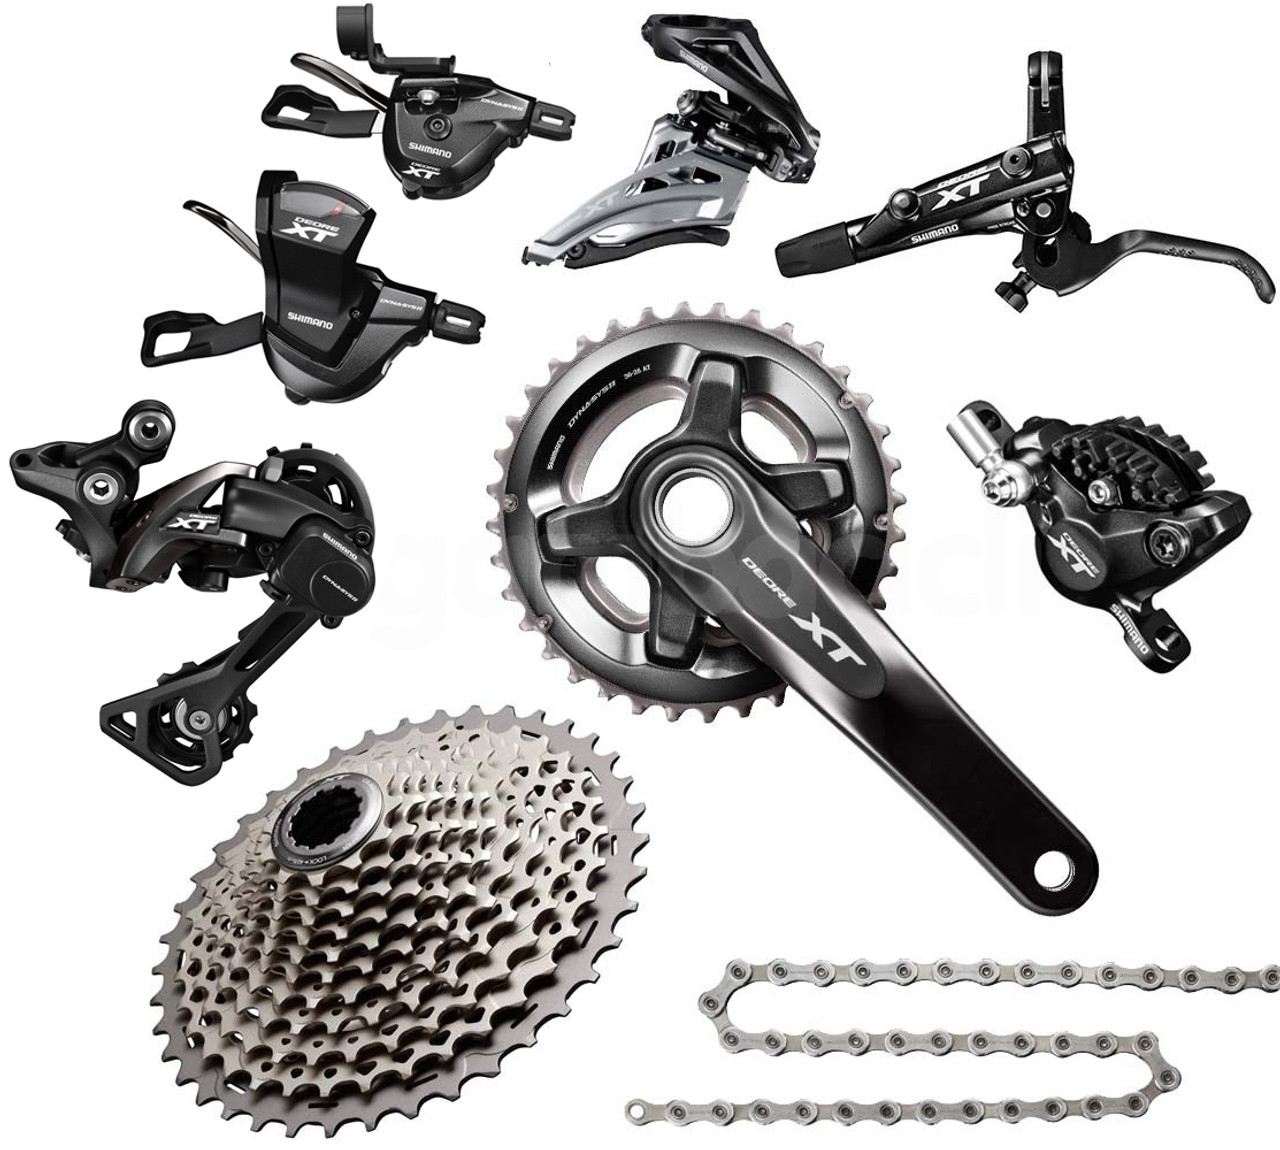 Texas Cyclesport Shimano Deore XT 8000 Groupset with M8000 Chainrings SH-XT-8000-8M 846.99 New